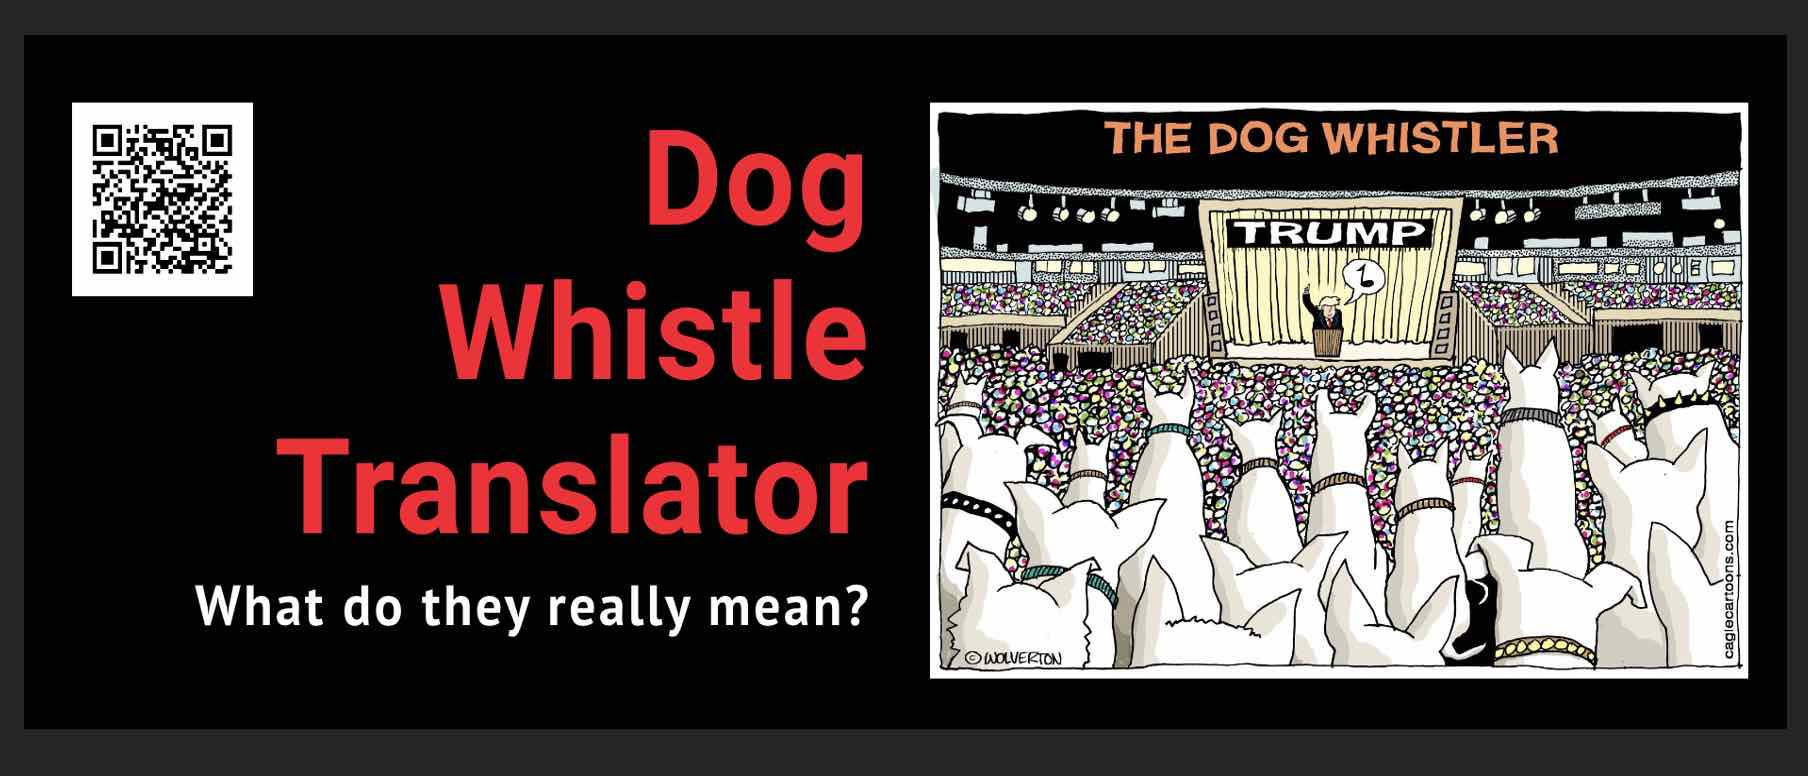 Politicians used Dog whistles to send coded messages to their followers. Understand what they are saying with this translator.